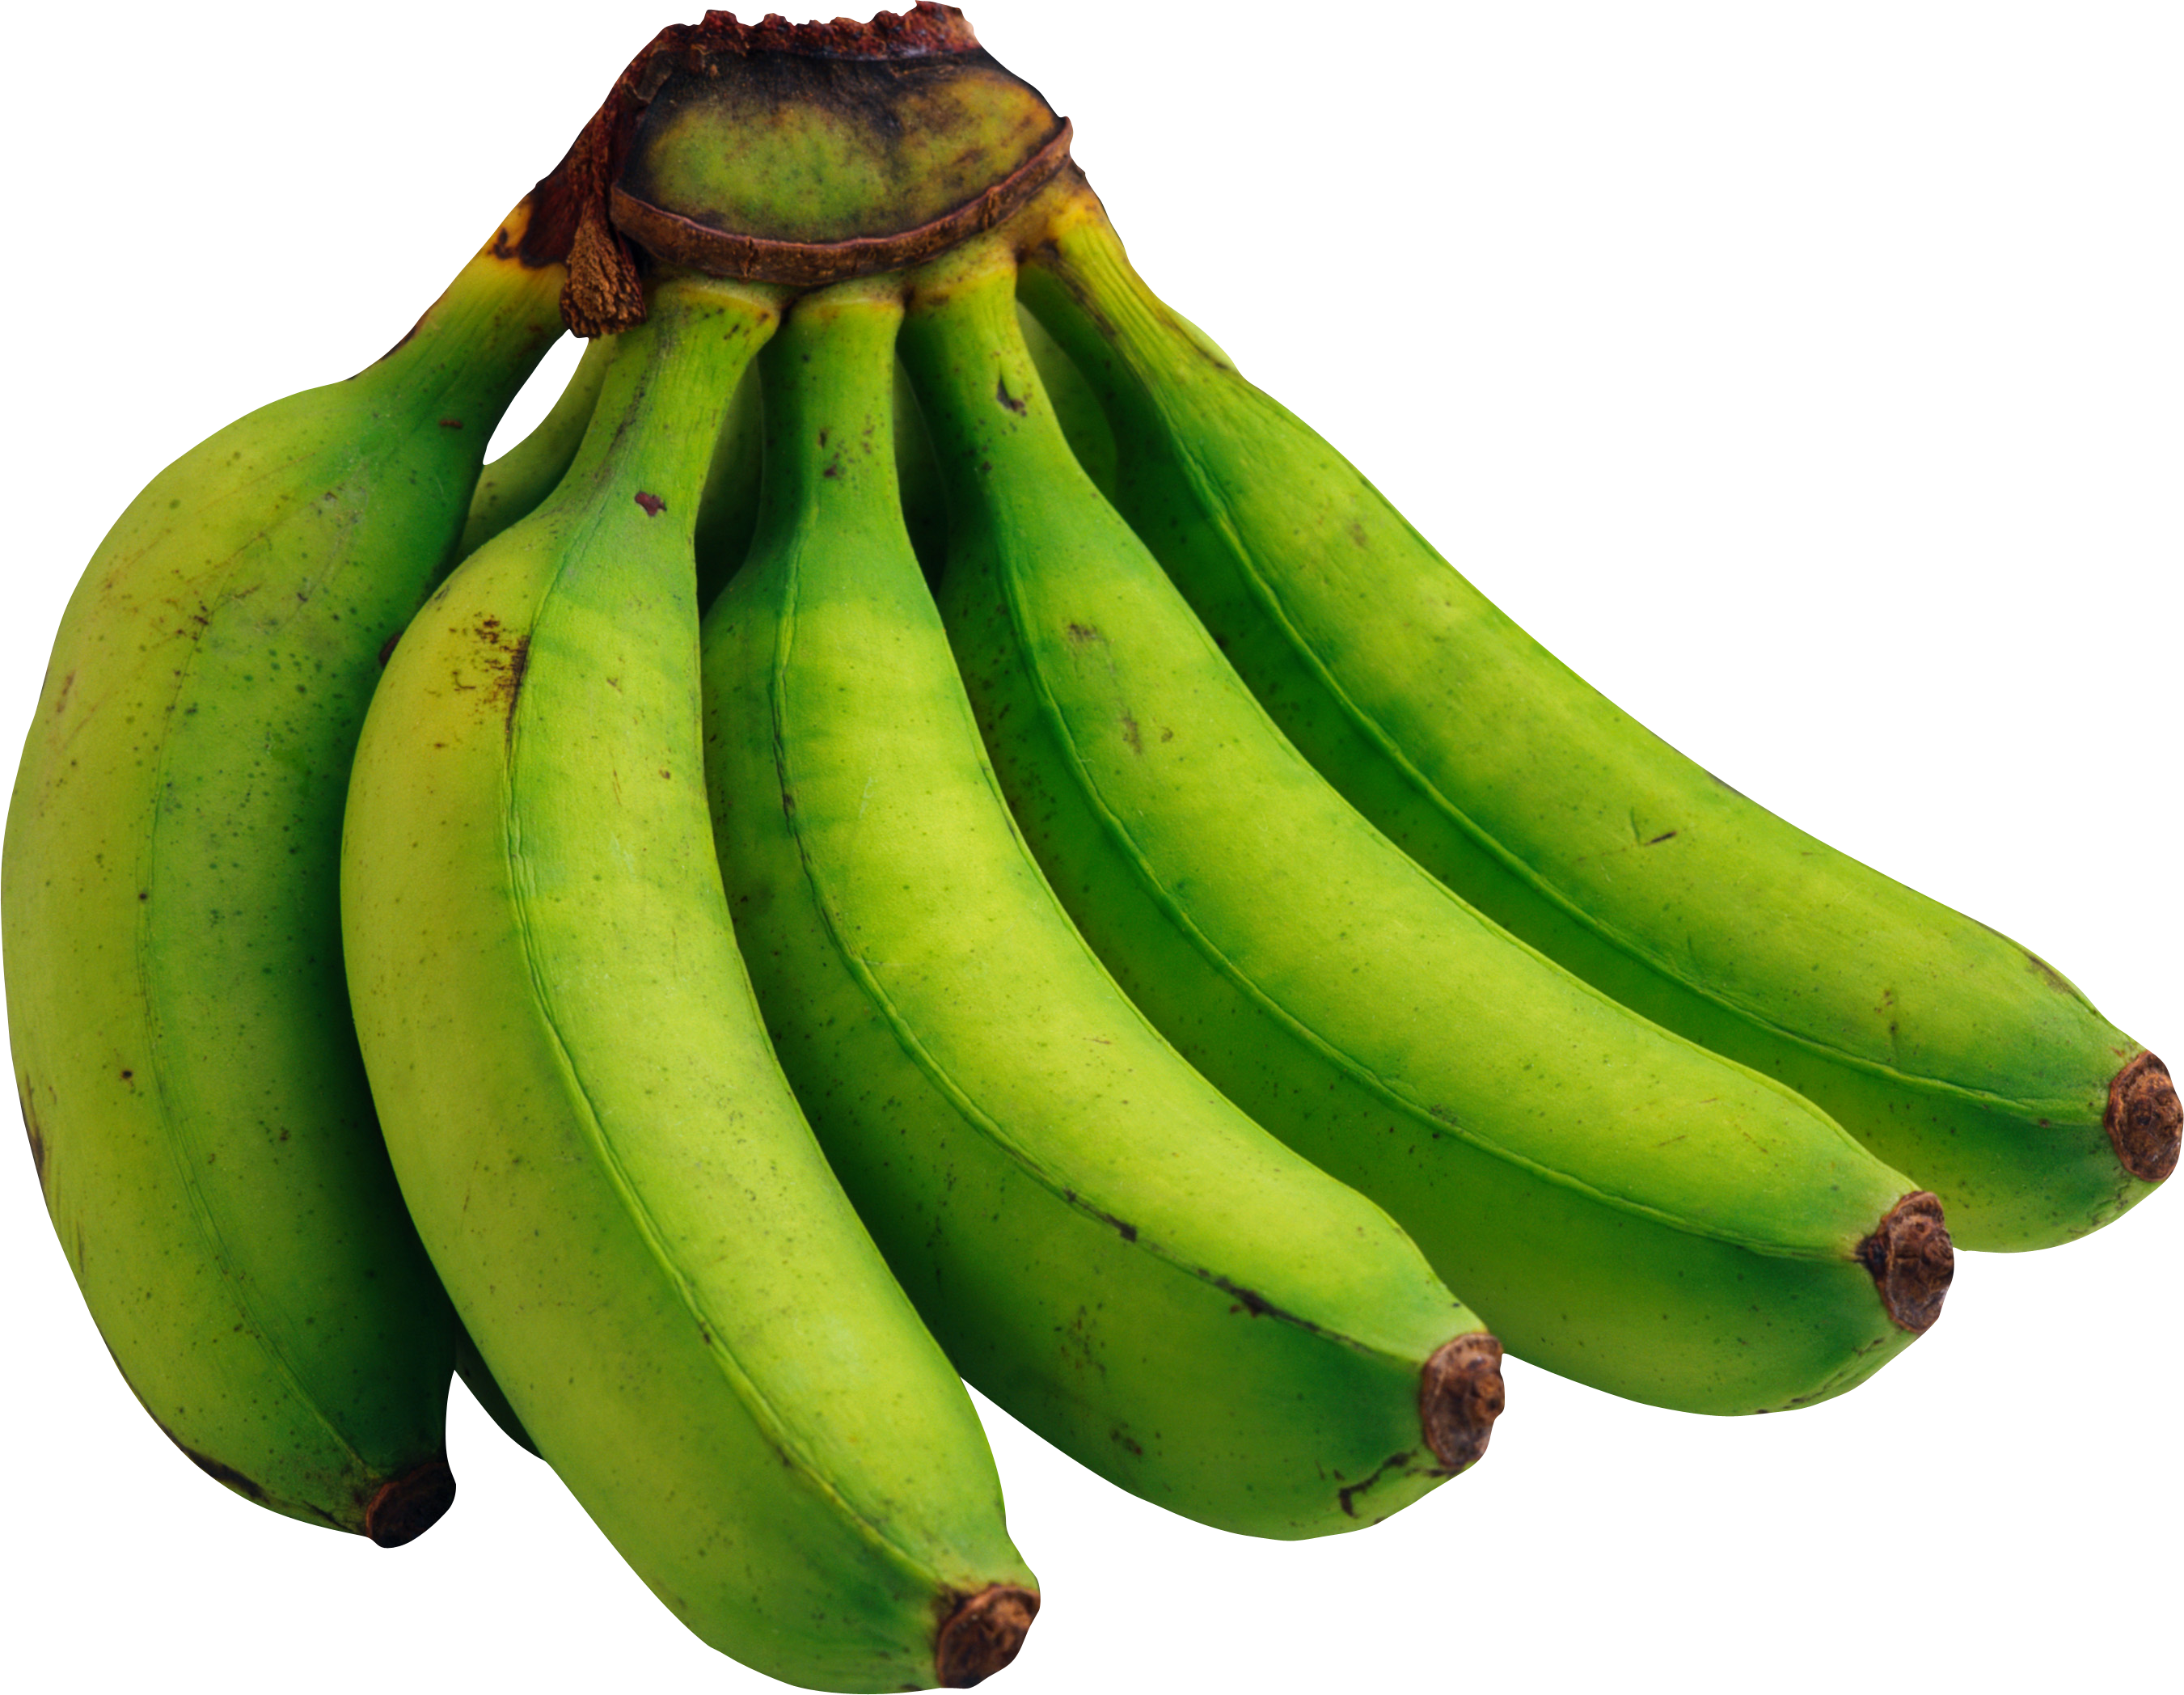 Green Bananas Png Image, Free Picture - HD Wallpaper 